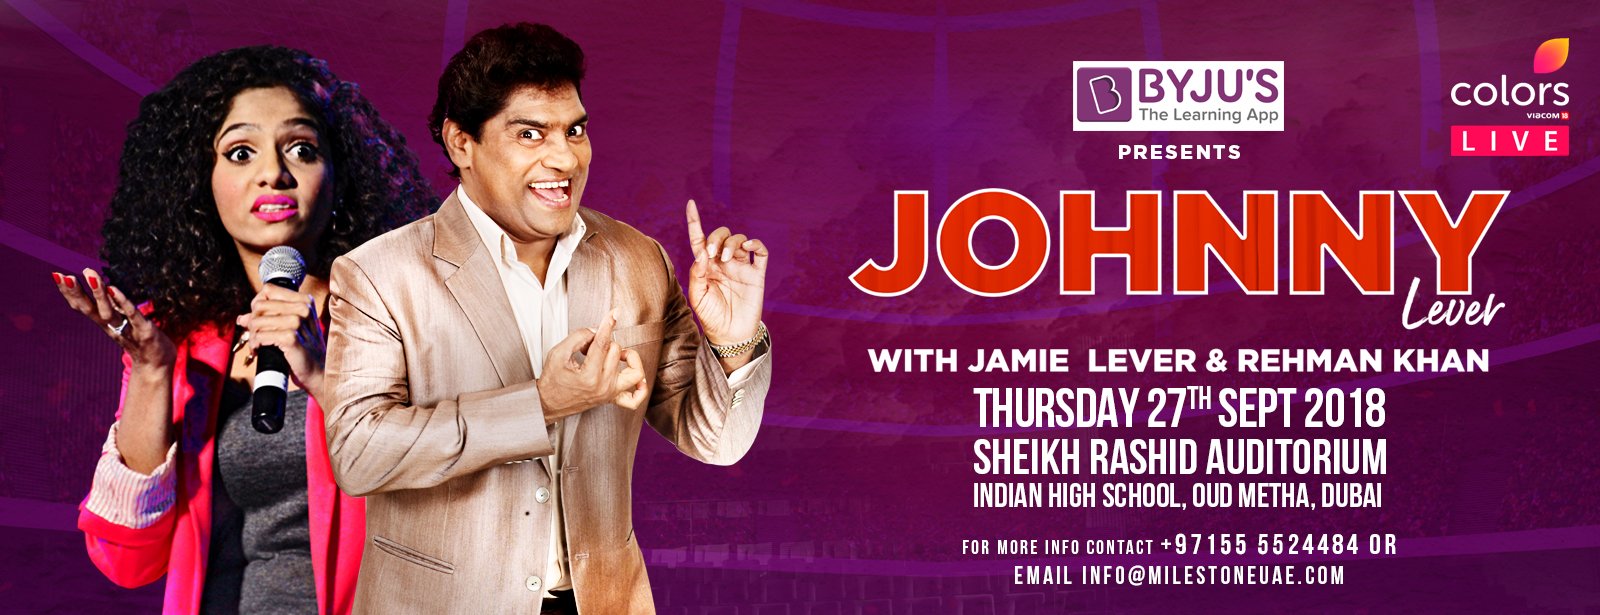 Famous Indian comedian Johnny Lever Live in Dubai - Coming Soon in UAE